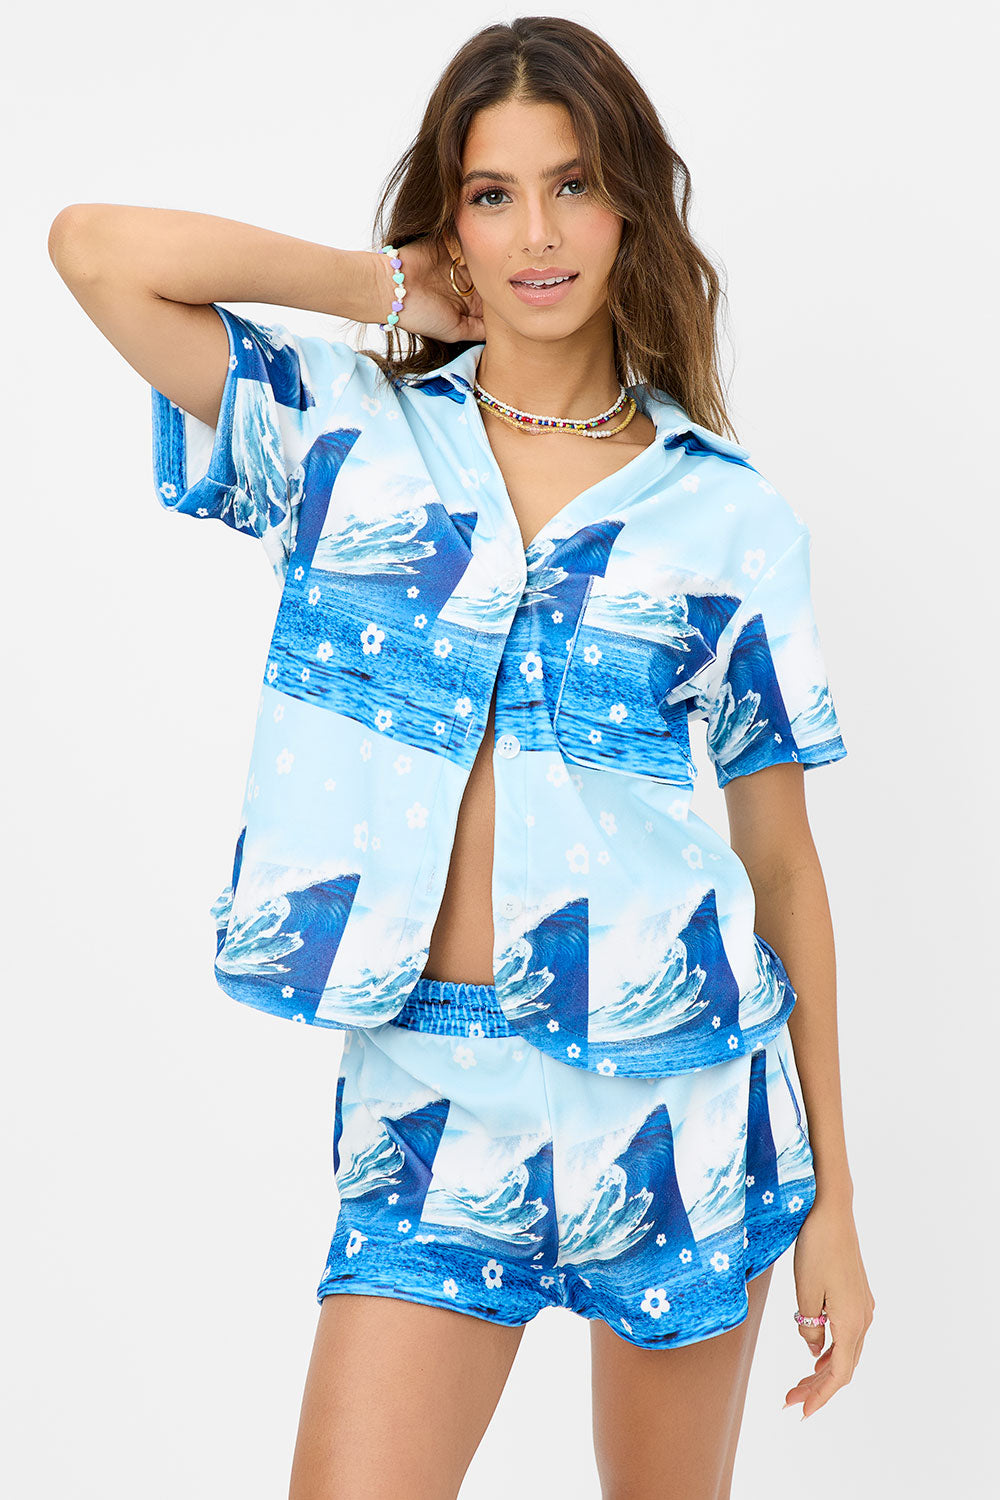 Coco Terry Button Up Shirt - Blue Tides